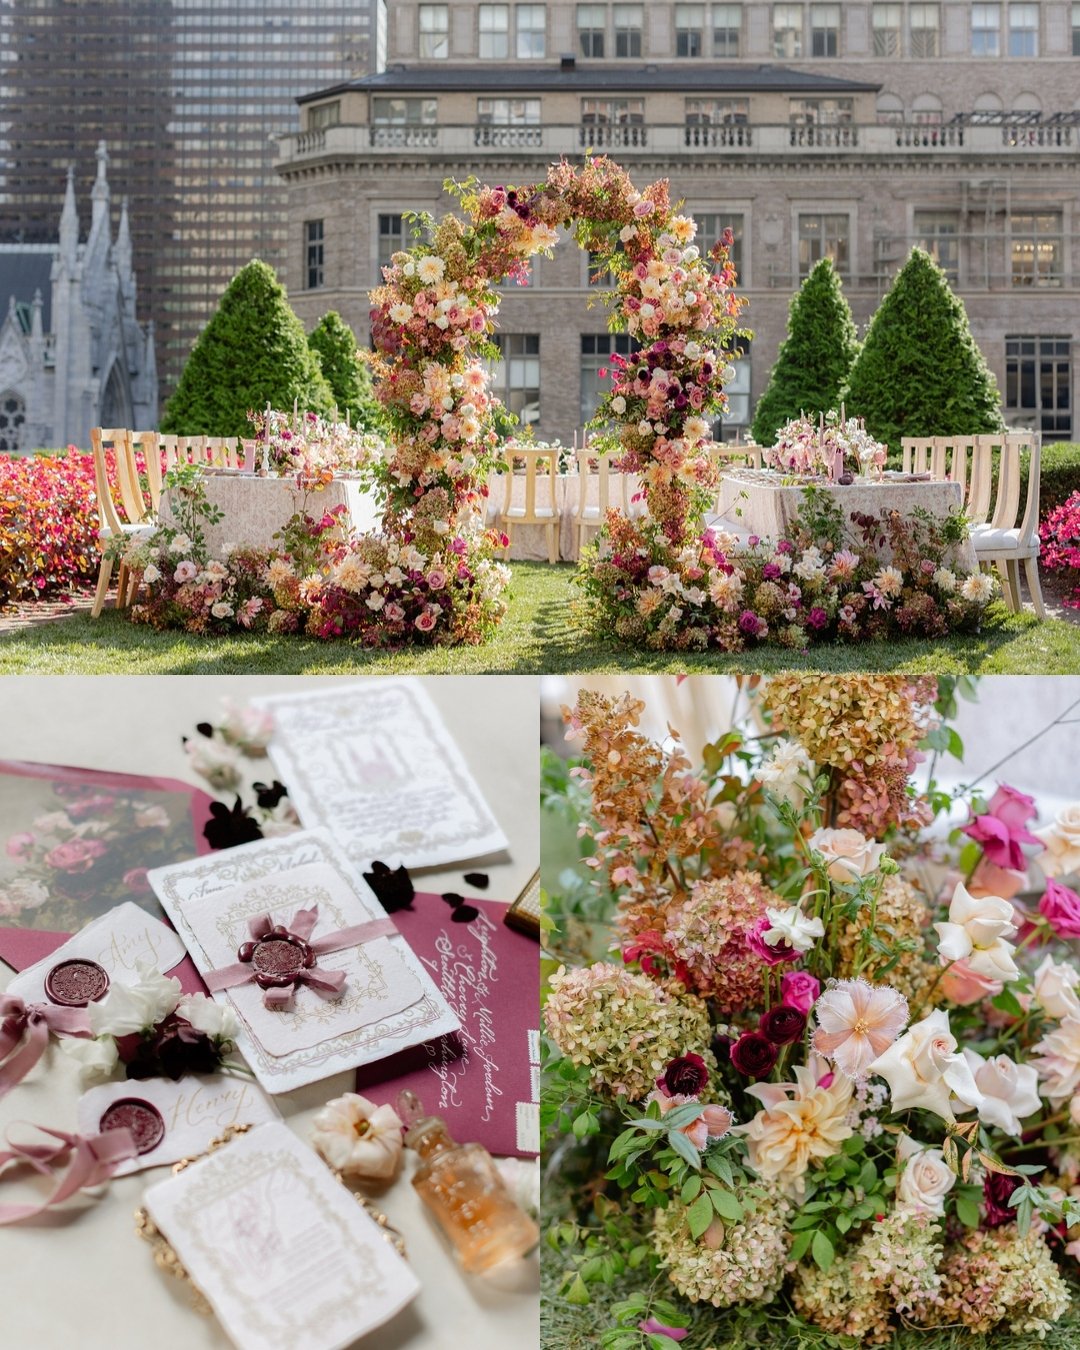 ceremony arch with fall florals acting as the entrance to a wedding reception setup, stationery suit with deep plum accents, ground floral arrangement